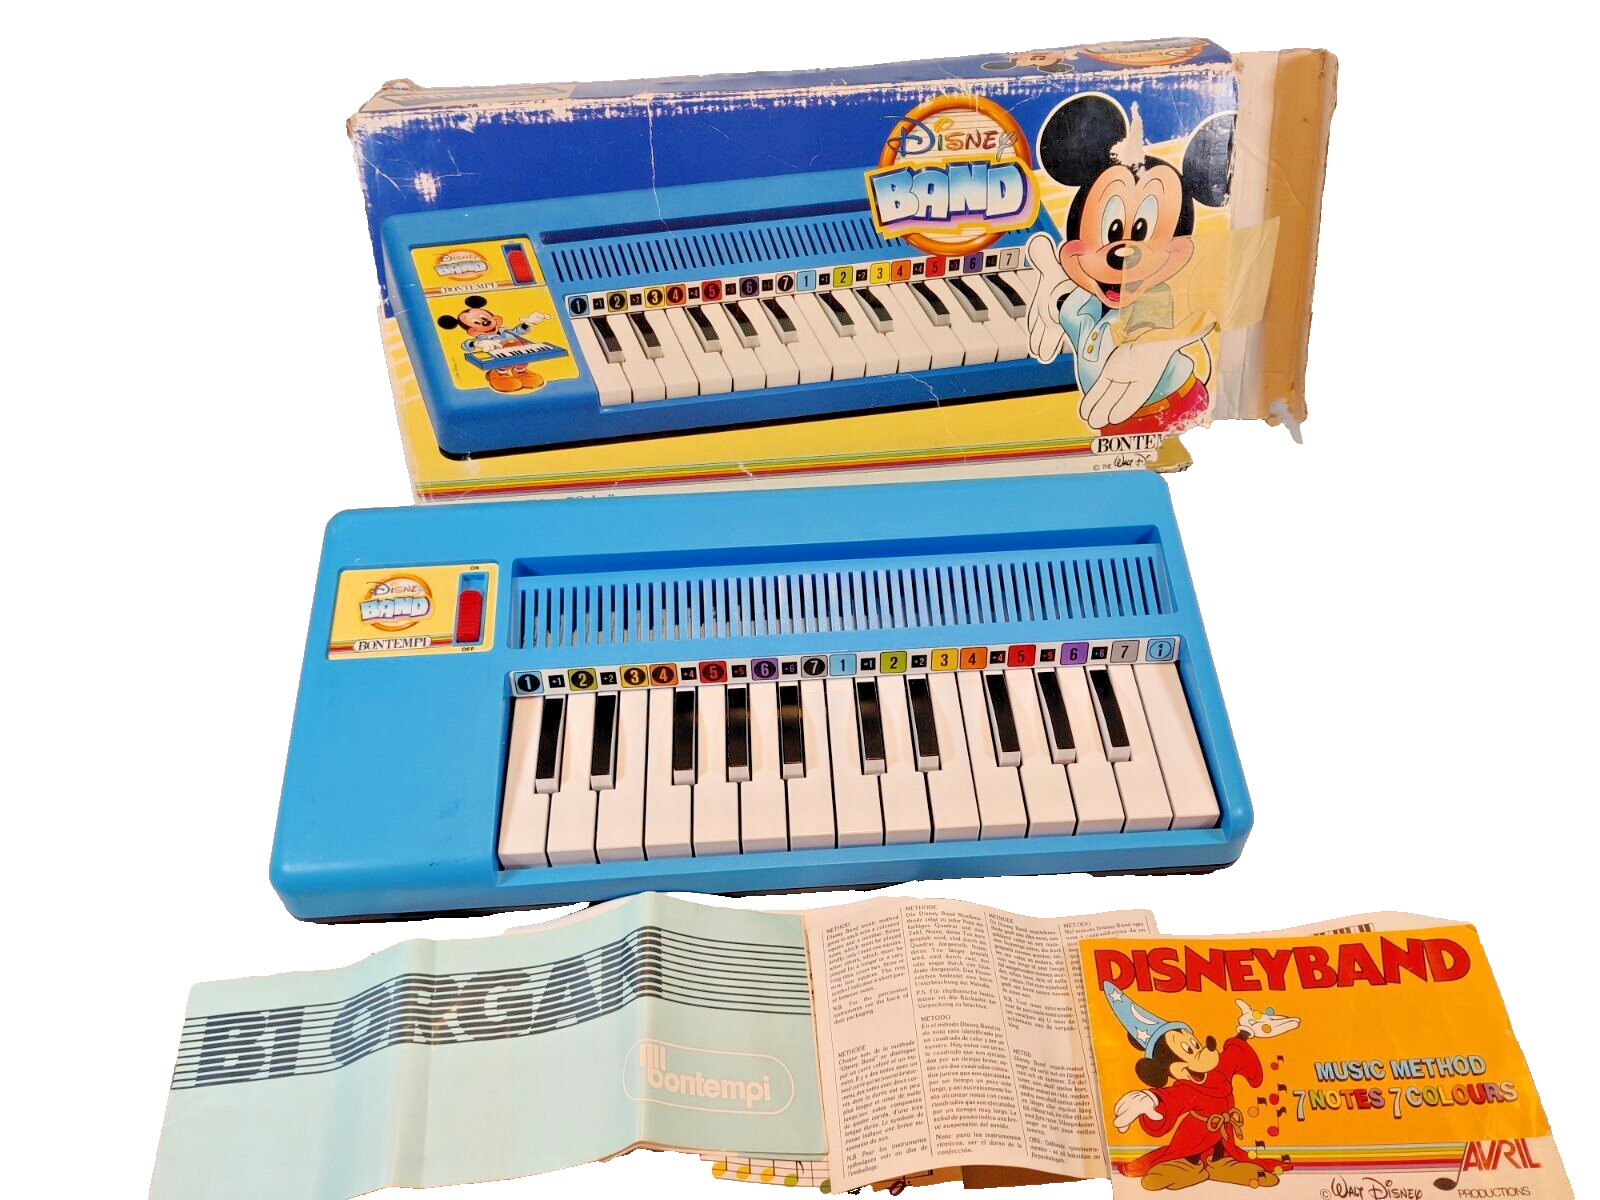 VINTAGE DISNEY BAND MICKEY MOUSE REED ORGAN 7 NOTE BONTEMPI MADE IN ITALY 80s - $40.73